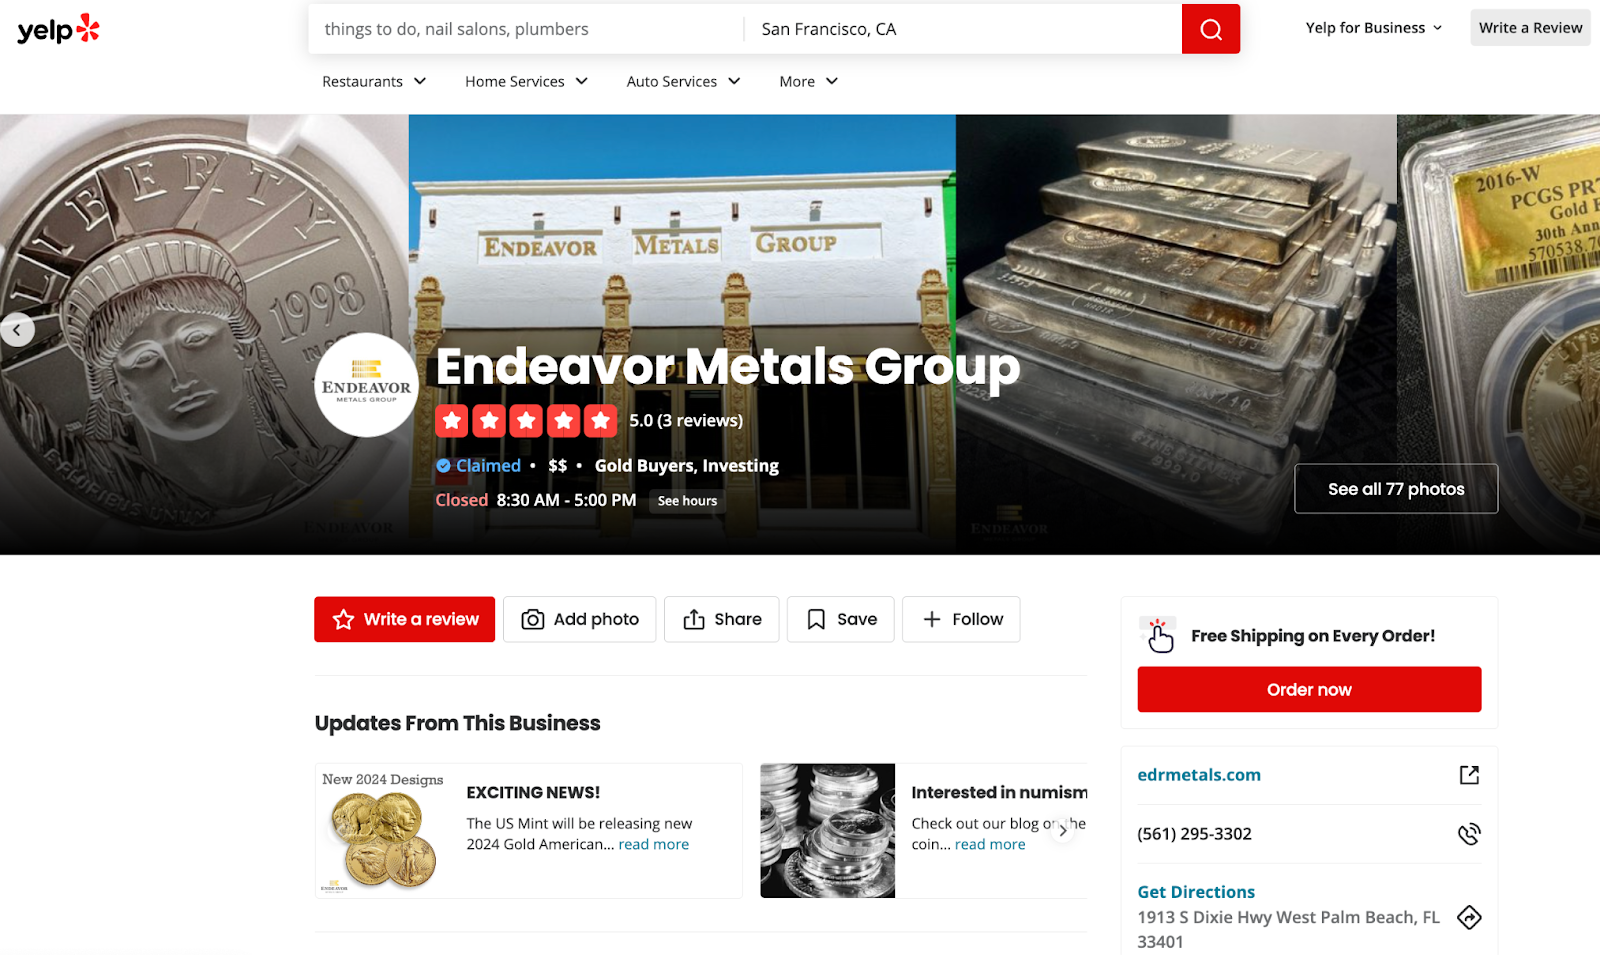 Endeavor Metals Group complaints on Yelp